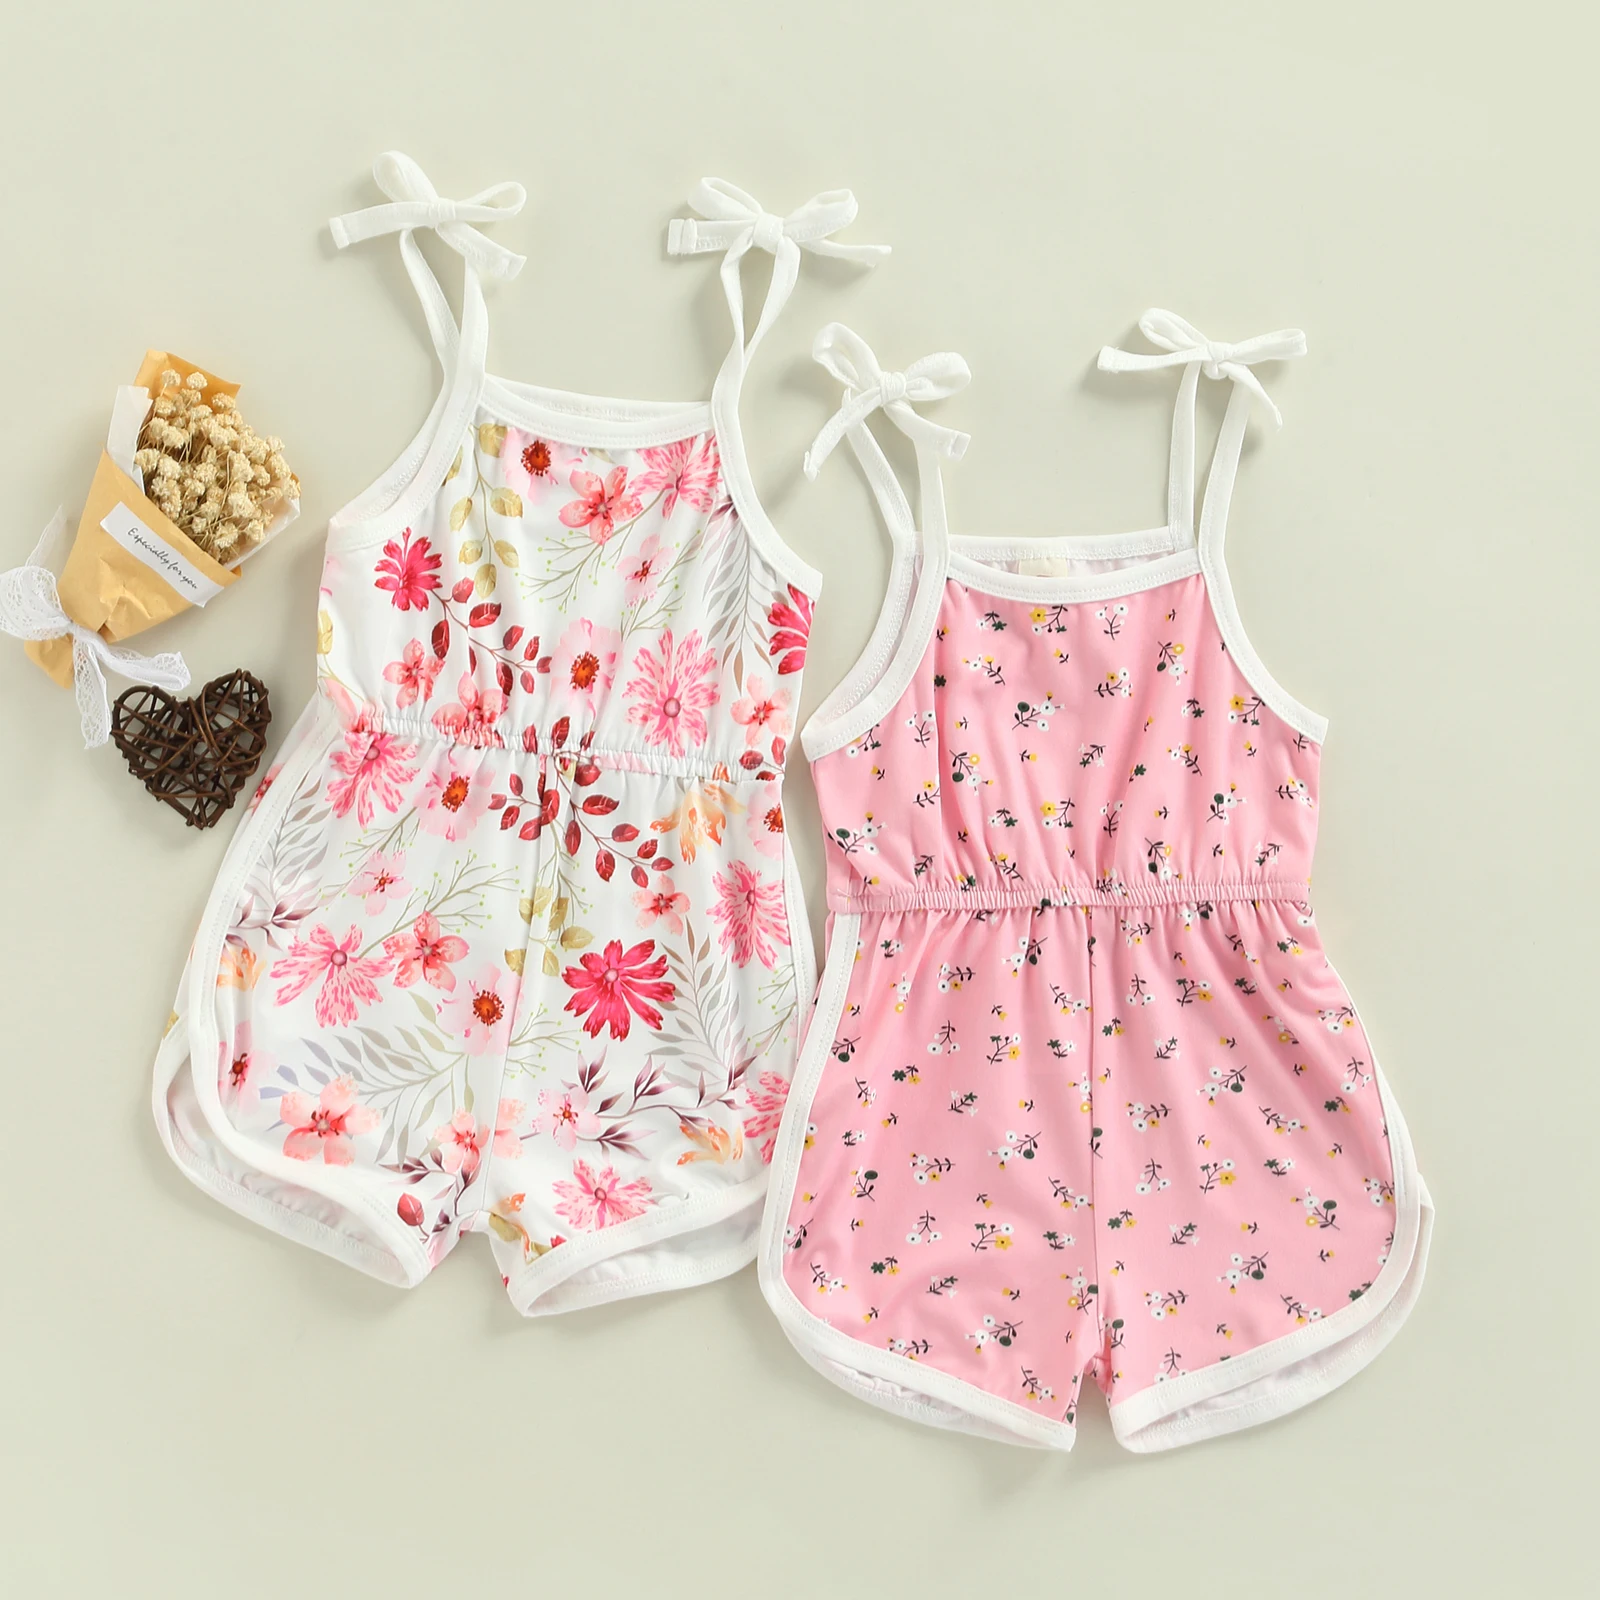 Infant Baby Girl Floral Romper, Sleeveless Square Neck Print Toddlers Short Summer Jumpsuits Casual Clothes 6M-3T best Baby Bodysuits